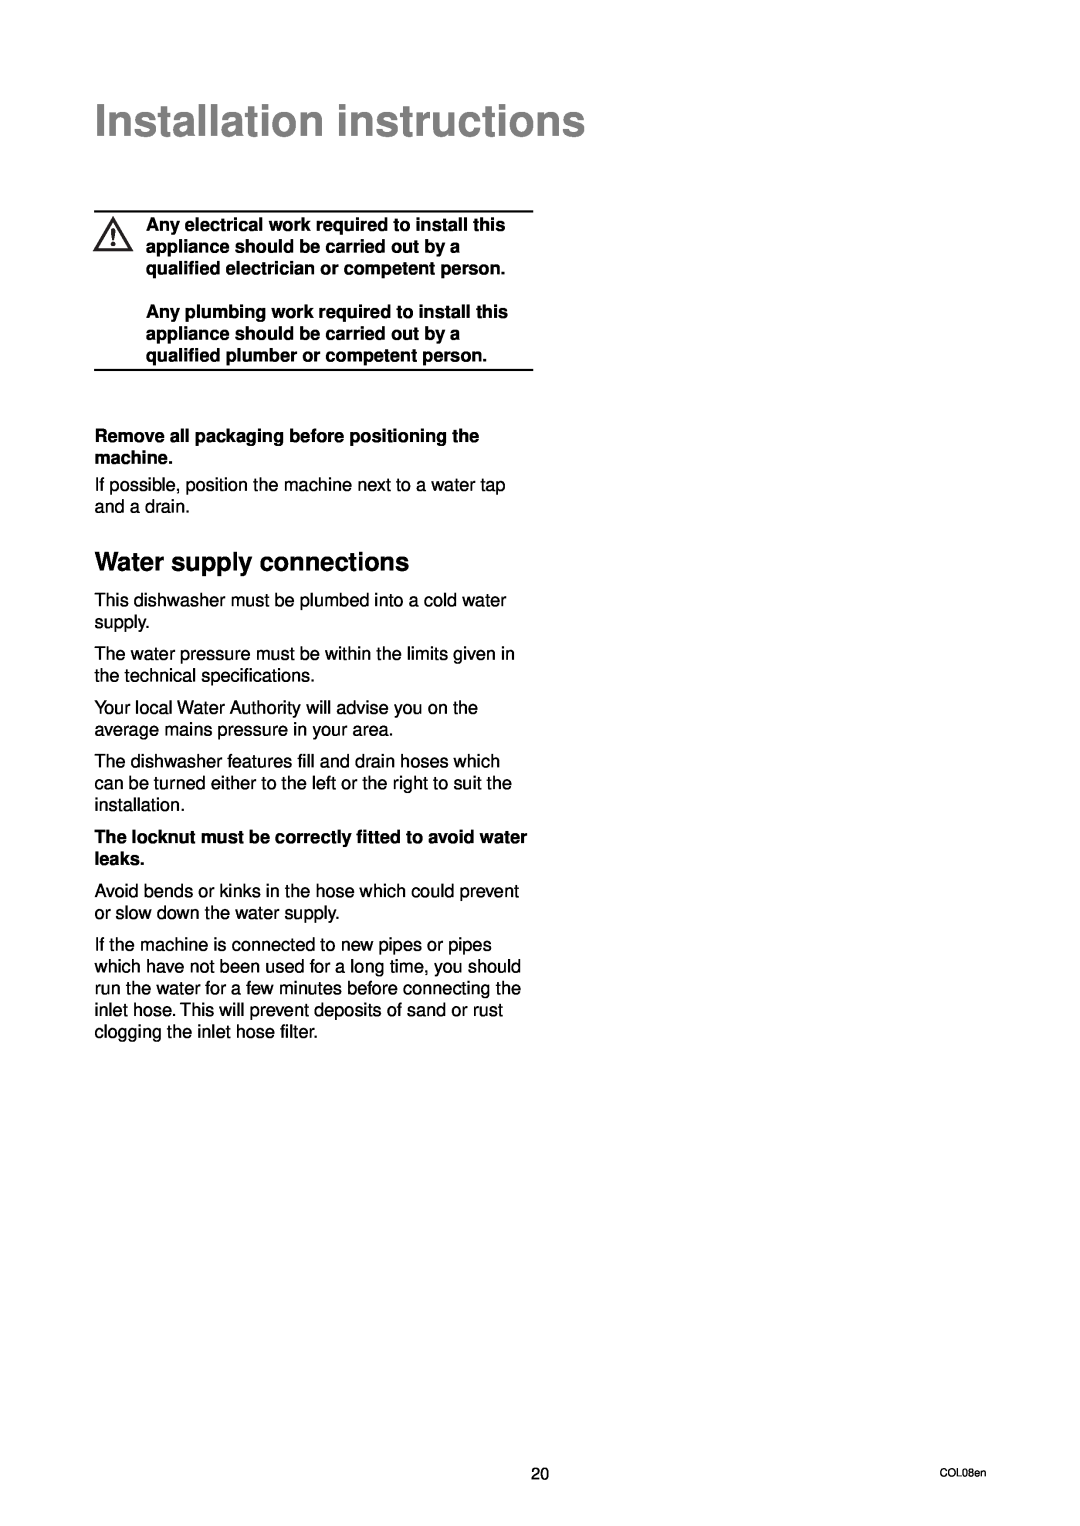 Zanussi DWS 935 Installation instructions, Water supply connections, Remove all packaging before positioning the machine 